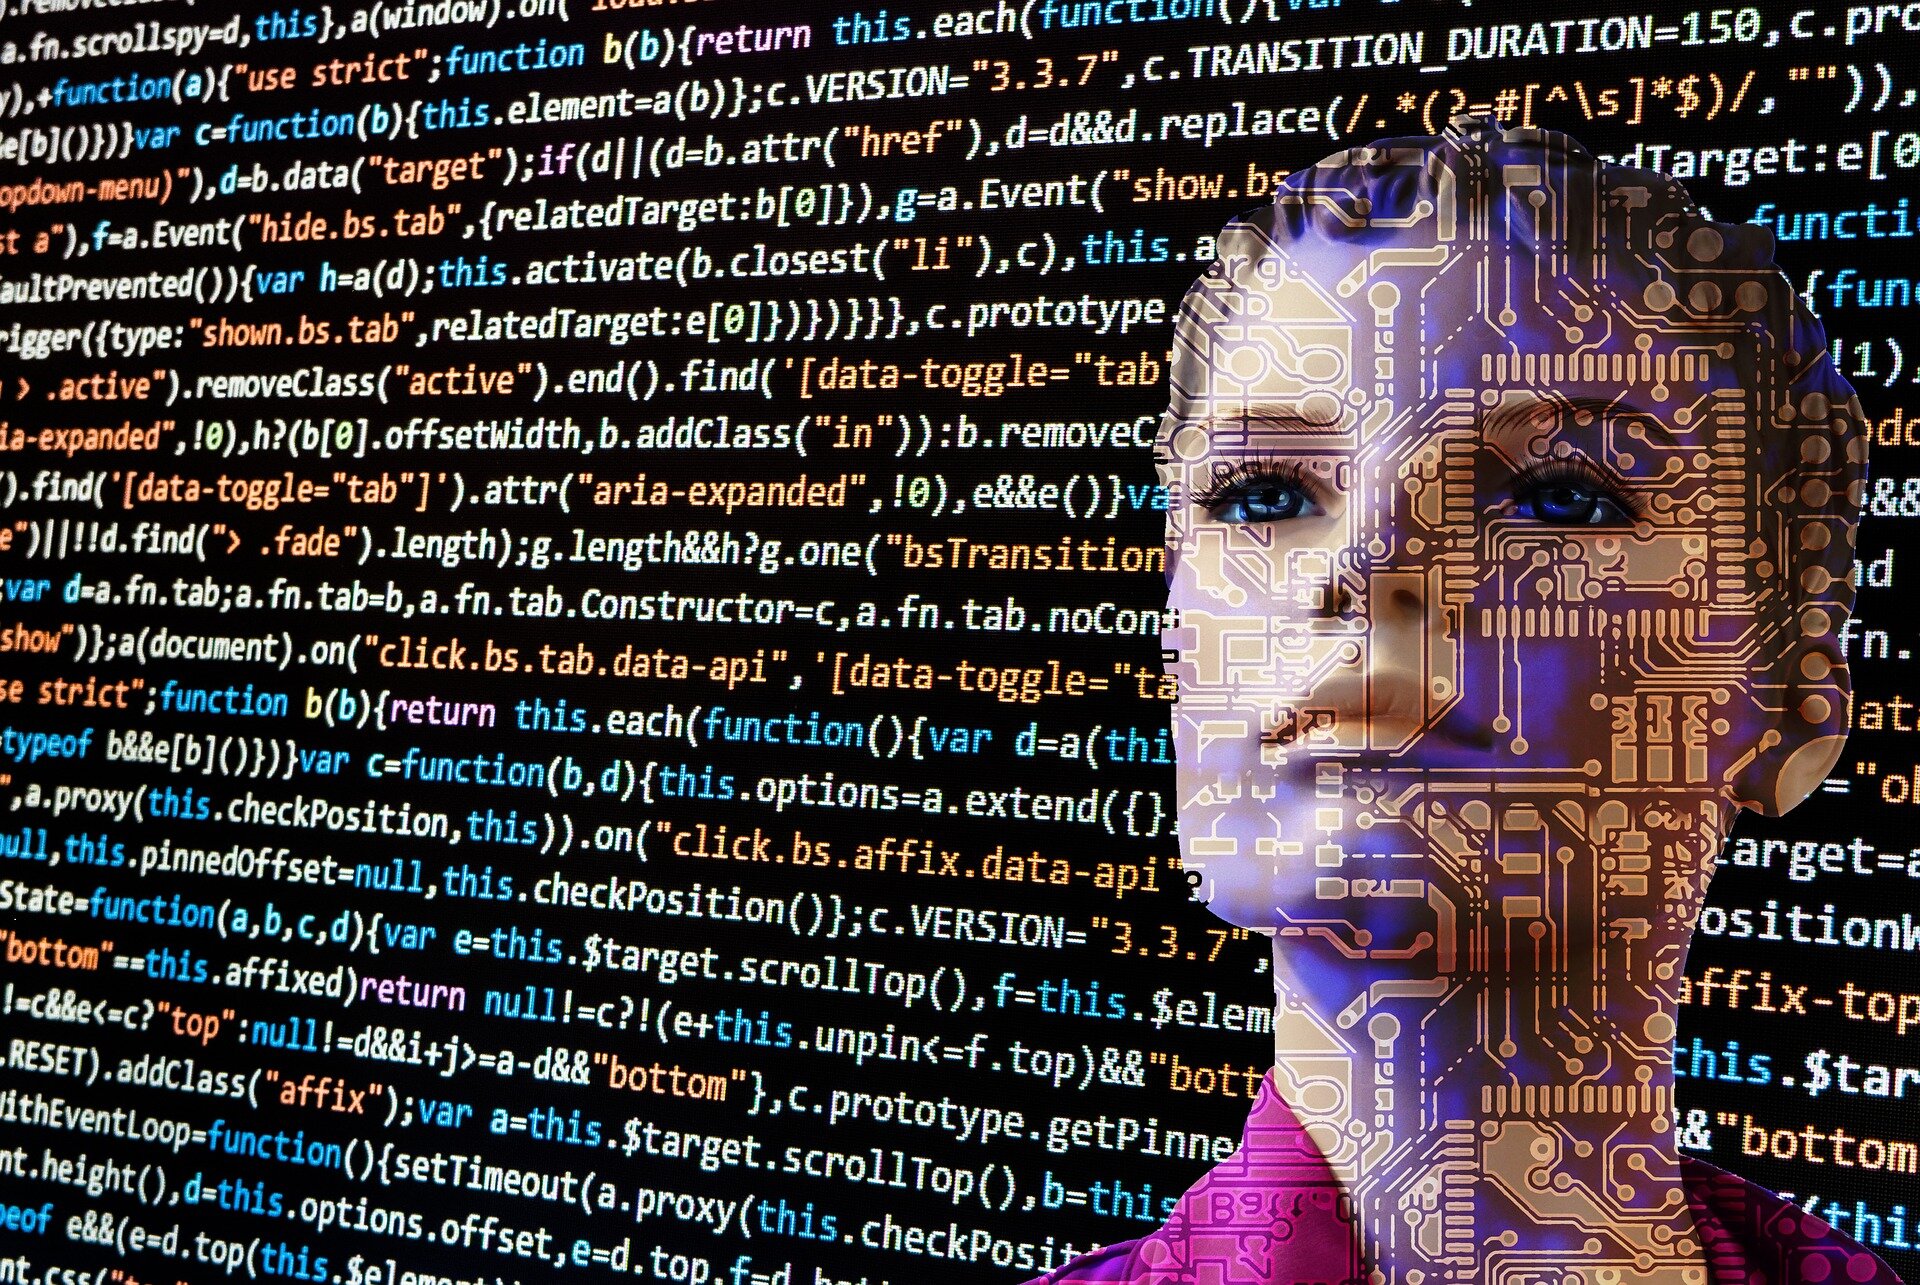 World leaders still need to wake up to AI risks, say leading experts ahead of AI Safety Summit